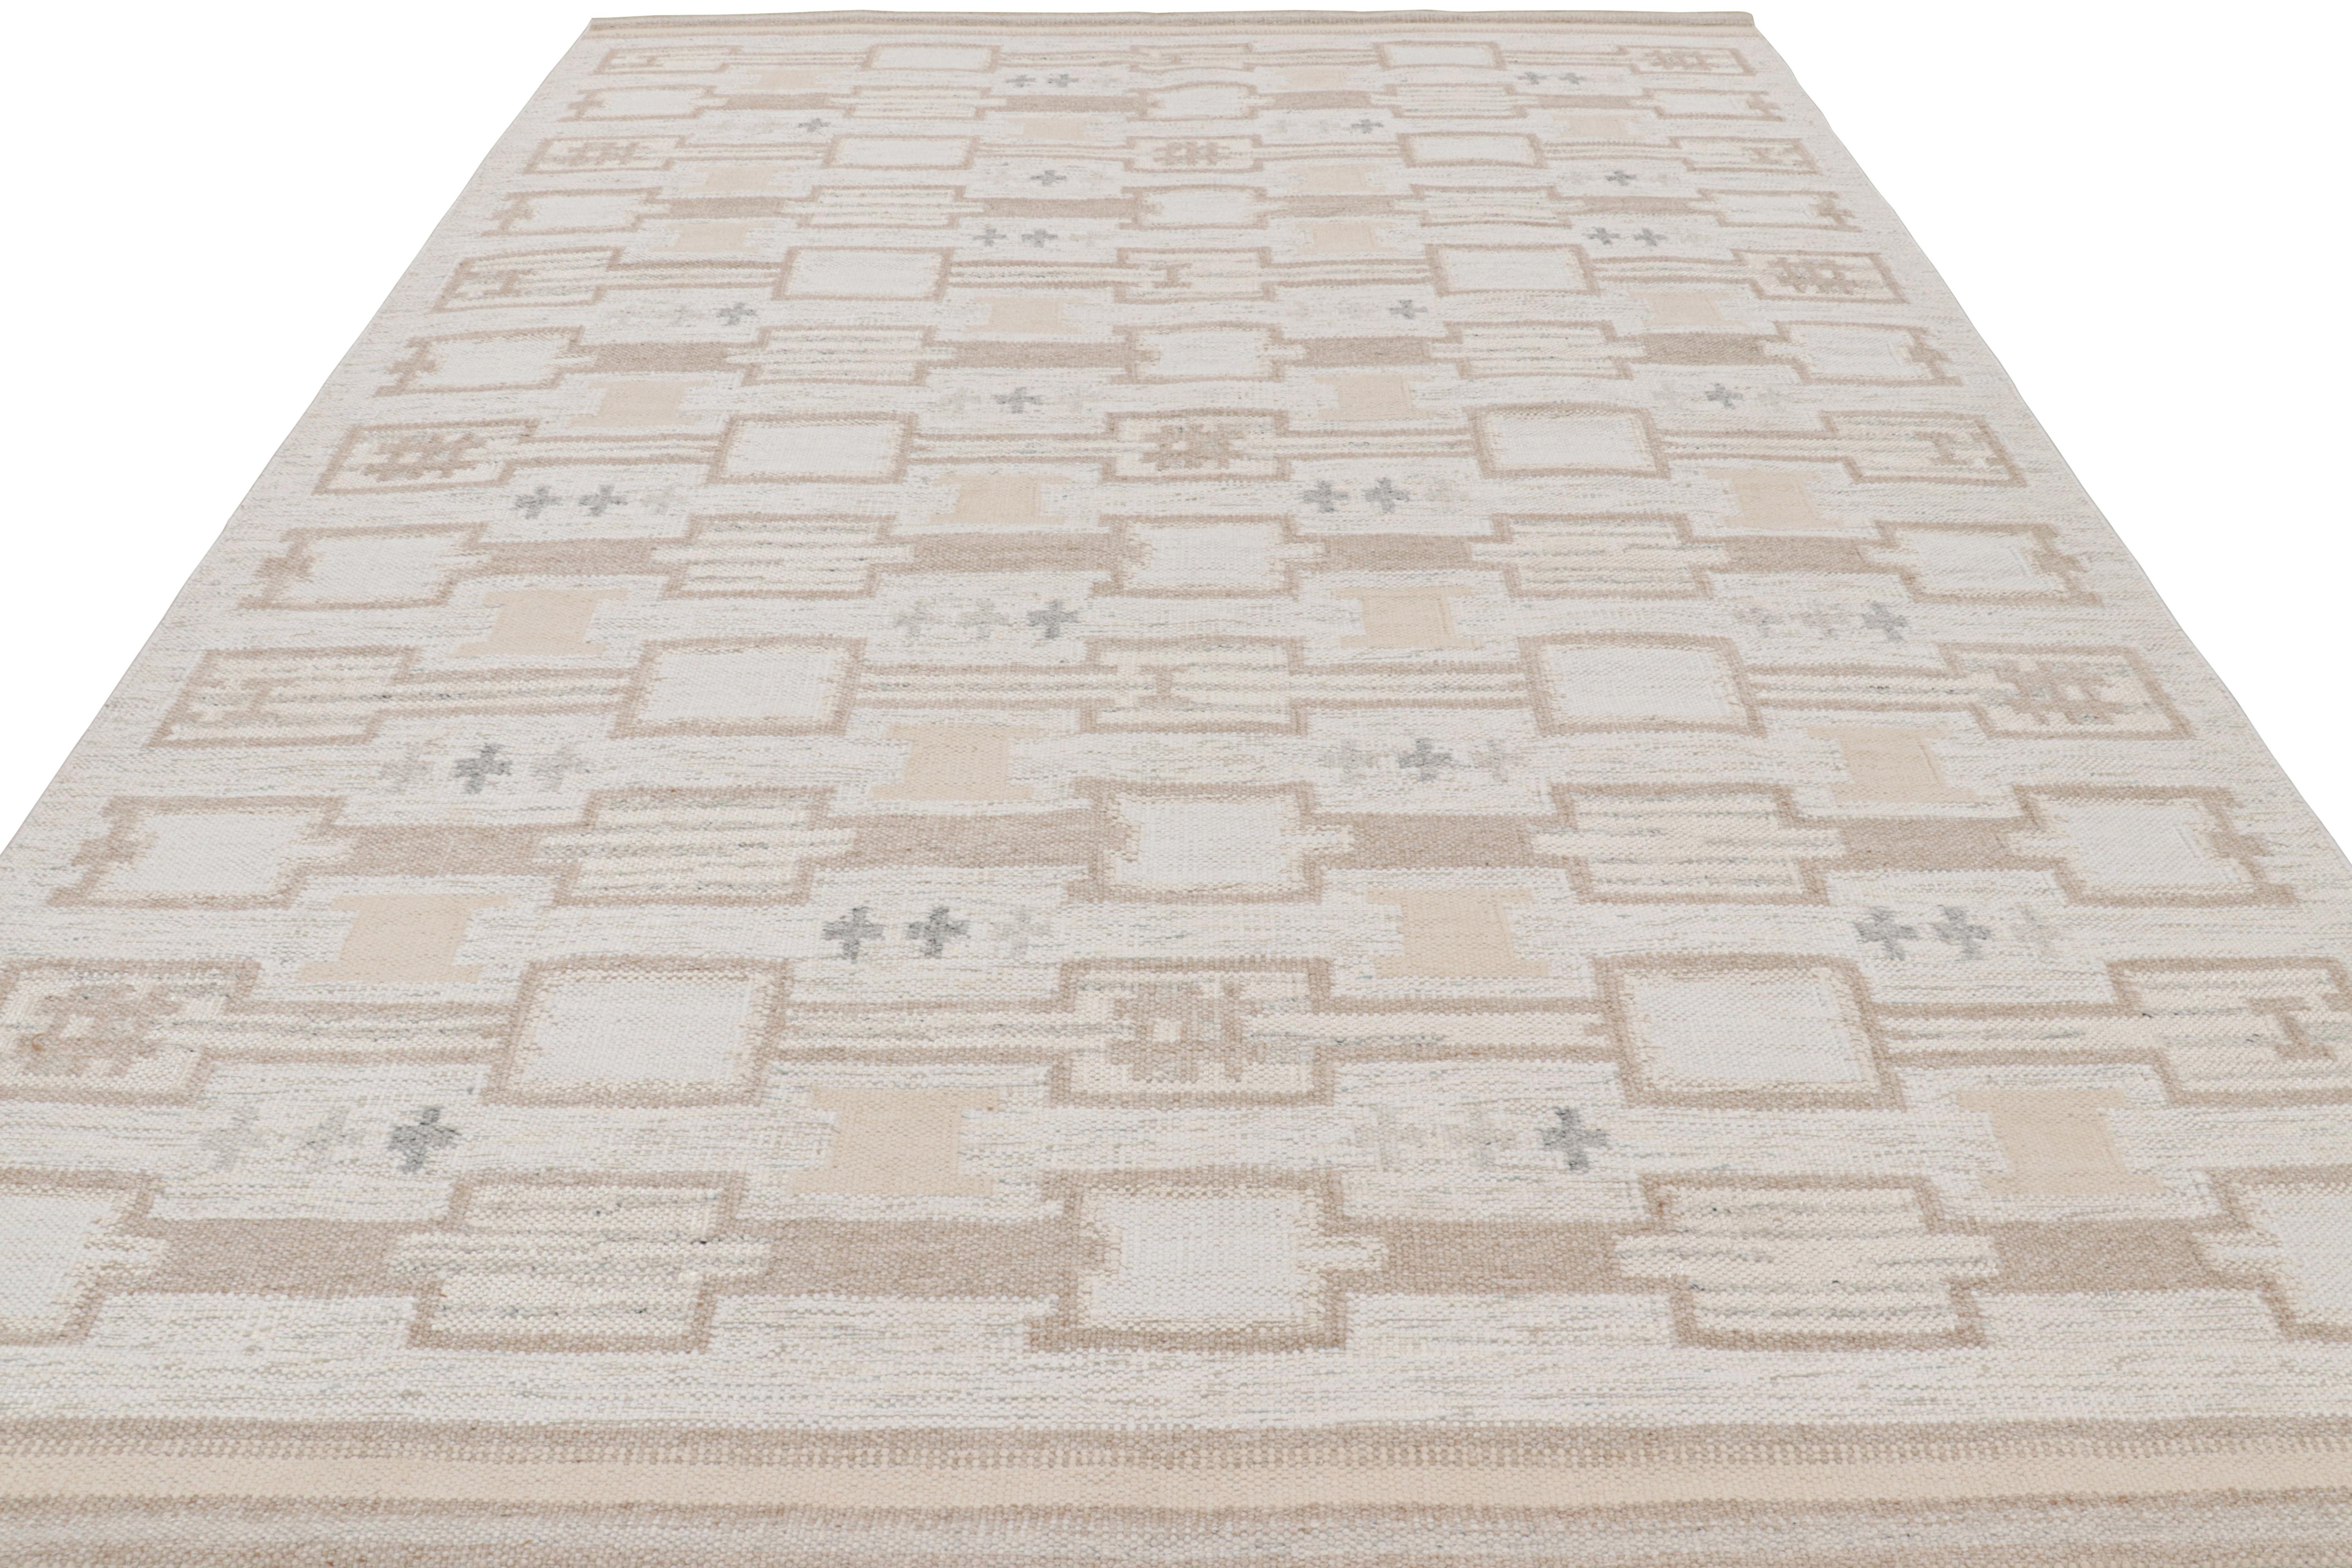 Hand-Woven Rug & Kilim’s Scandinavian Style Rug with Beige-Brown Geometric Patterns For Sale